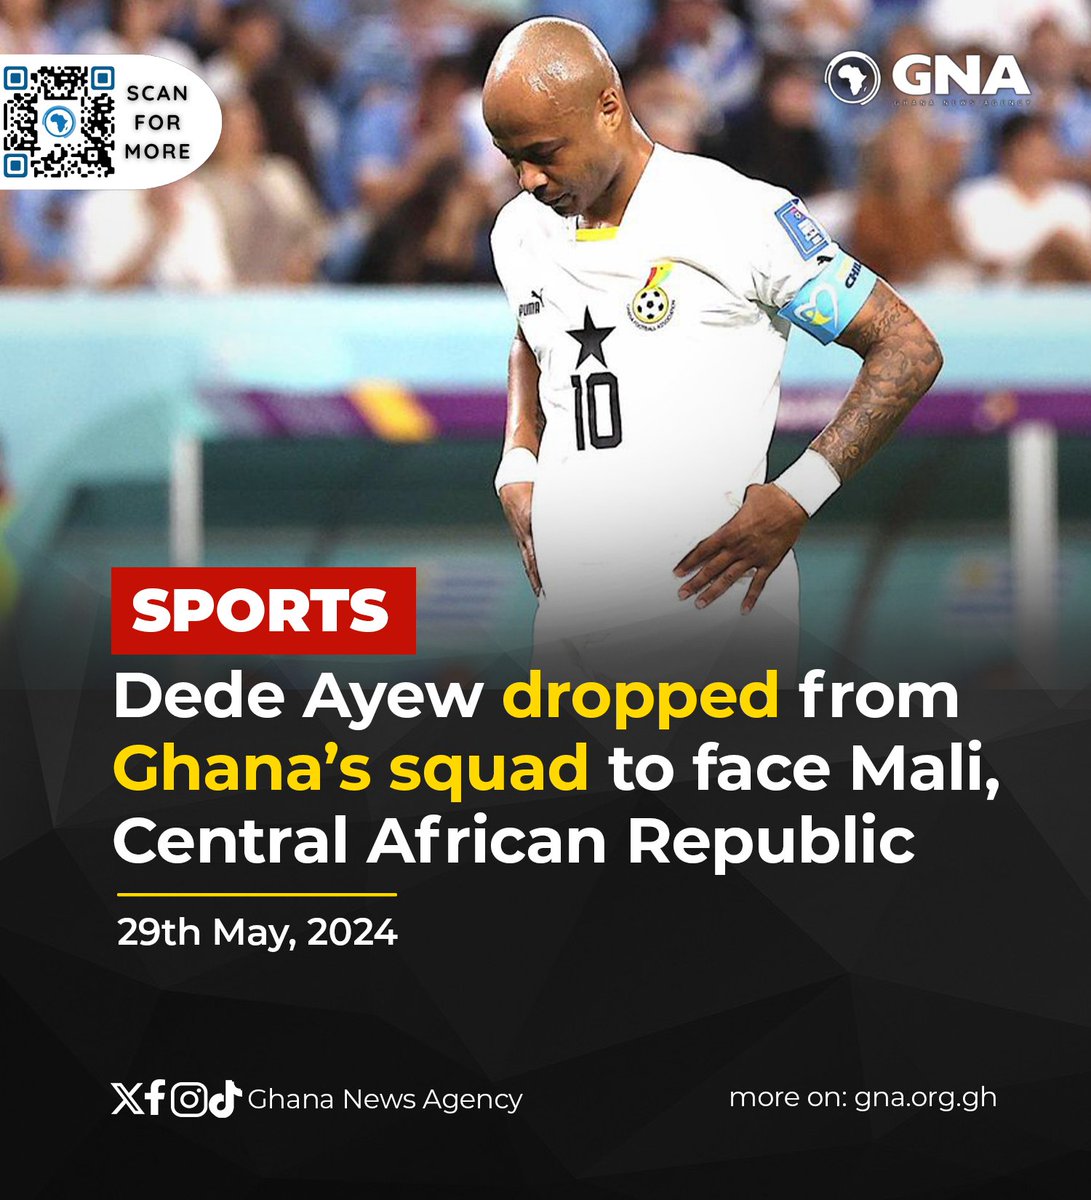 Dede Ayew dropped from Ghana's squad to face Mali, Central Africa Republic 

#GhanaNewsAgency #GNA 
Black Stars